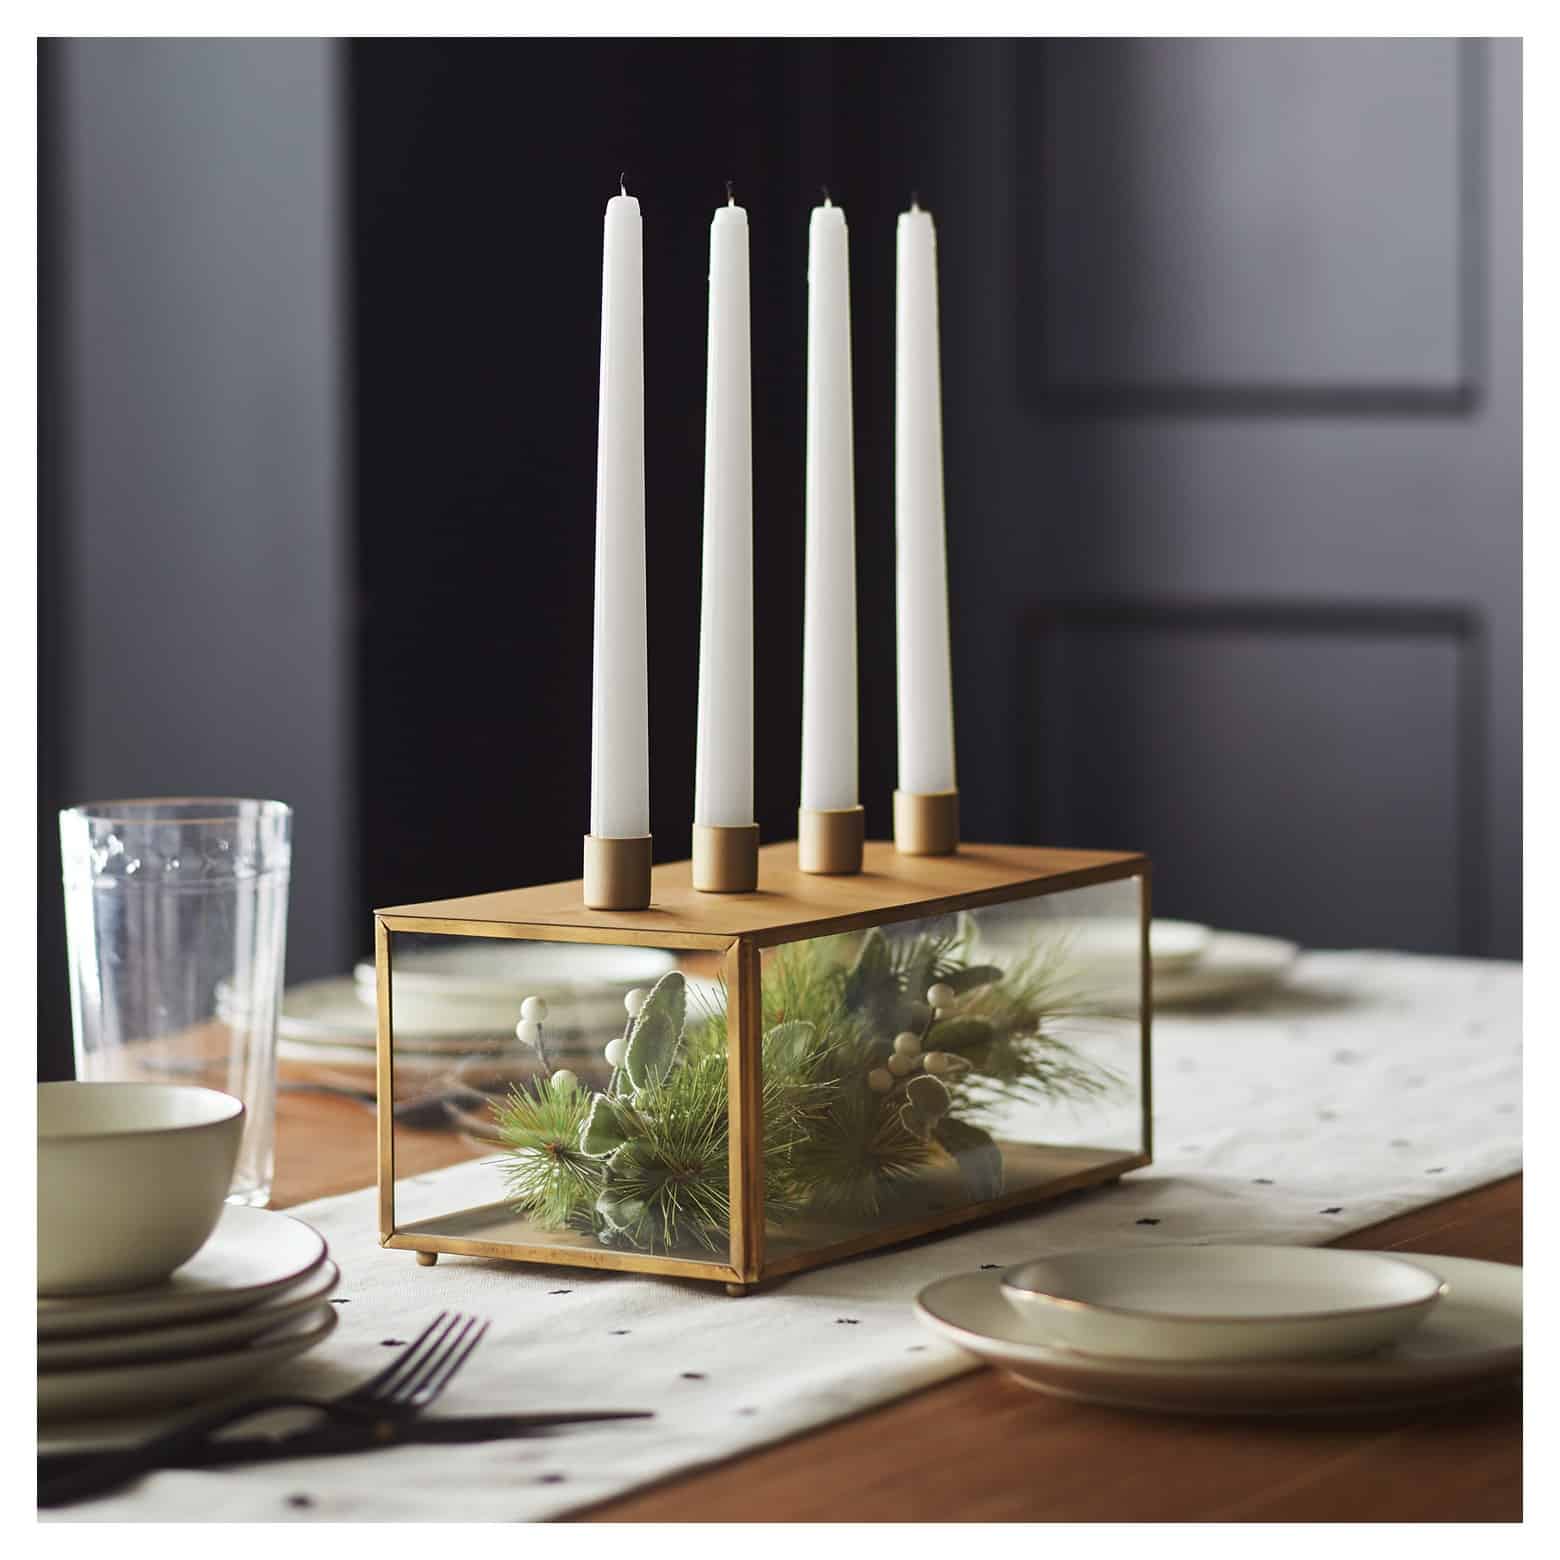 A photo of a candle set on a table.